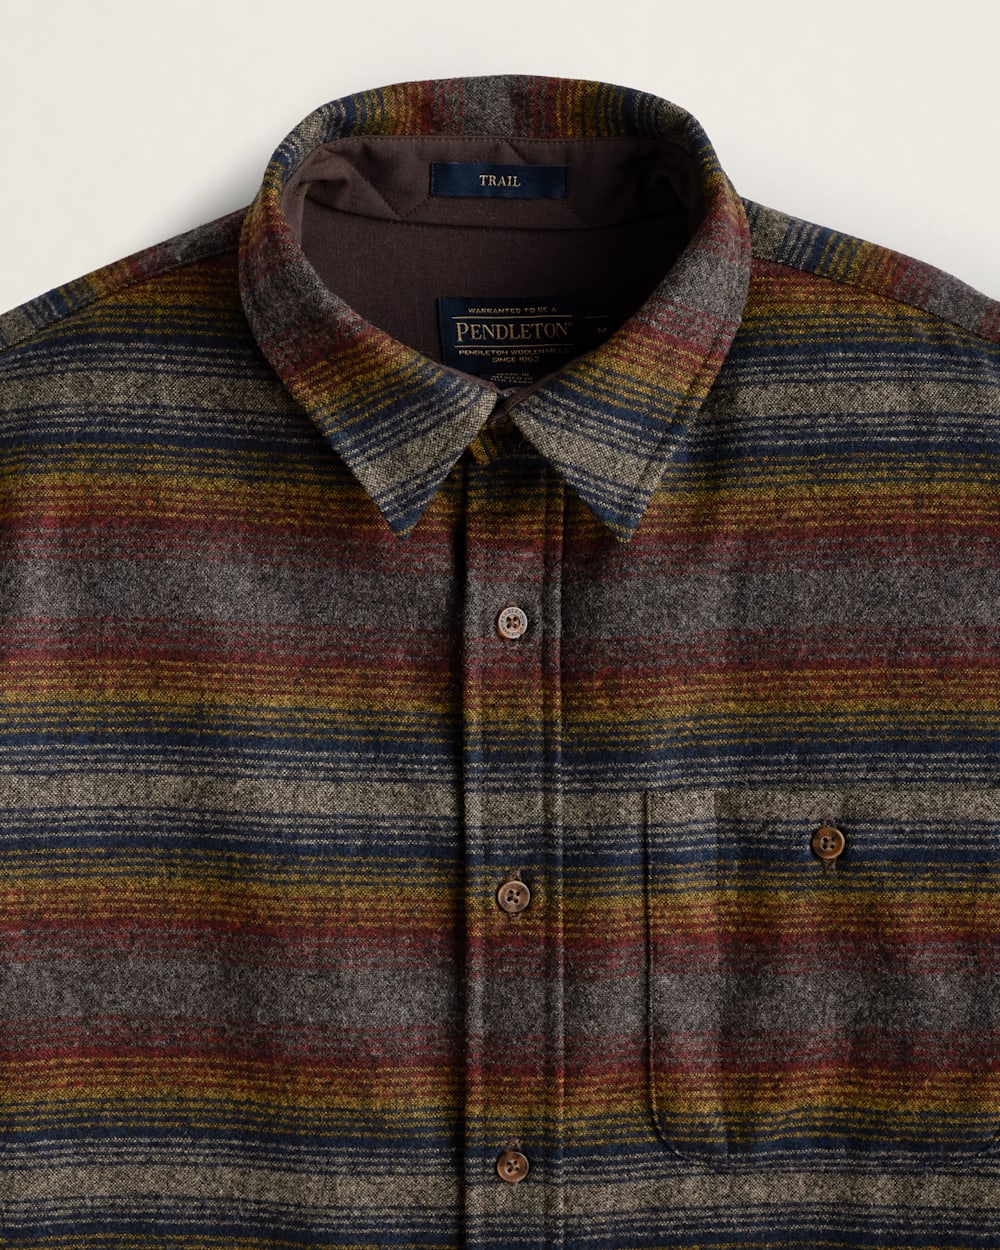 ALTERNATE VIEW OF MEN'S STRIPE ELBOW-PATCH TRAIL SHIRT IN BROWN MULTI OMBRE STRIPE image number 3